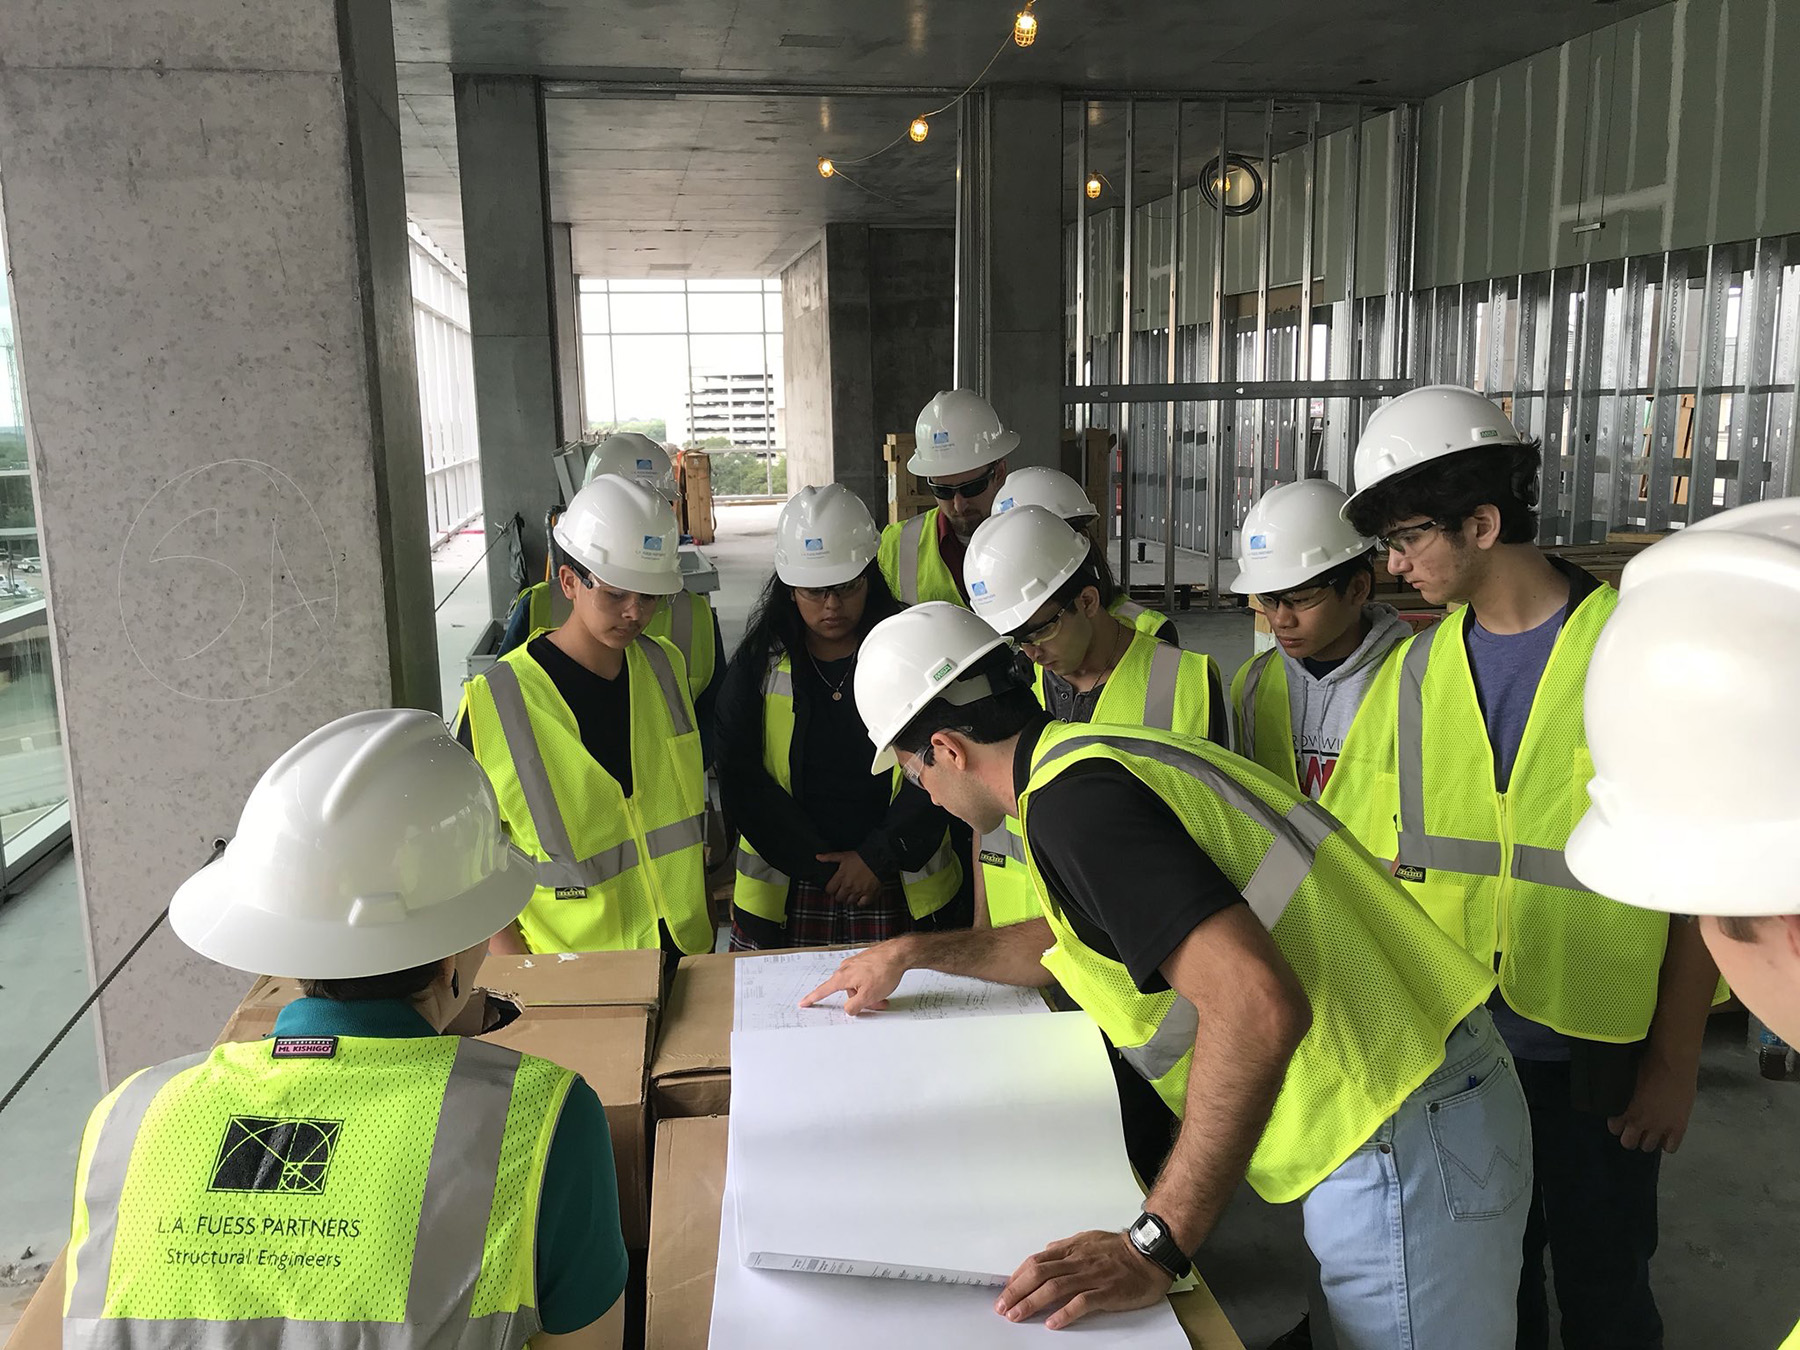 group of students and engineers wearing hard hats and safety vests looking at a drawing